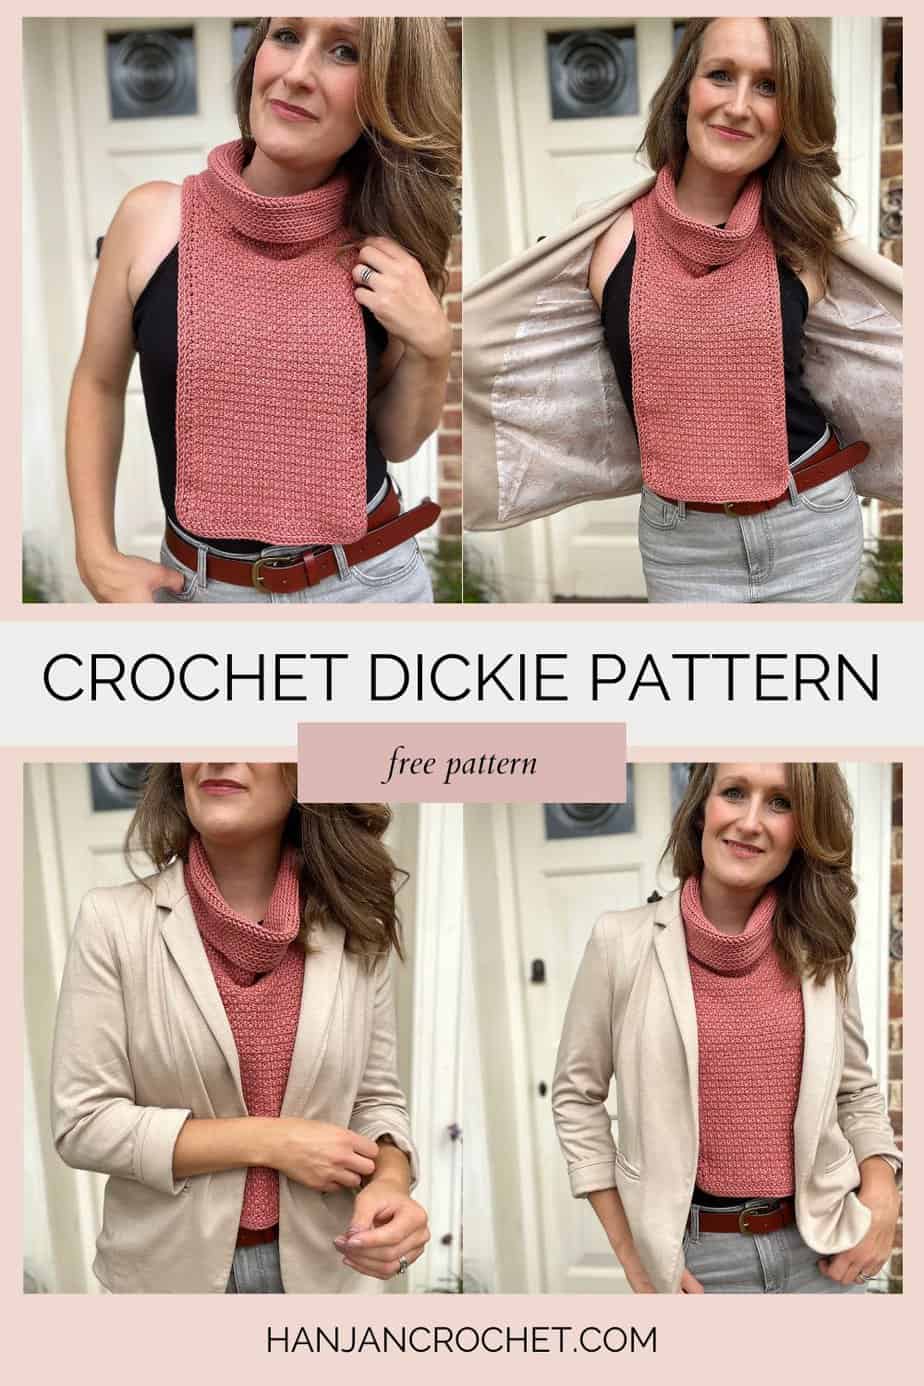 Four images of crochet dickie pattern.